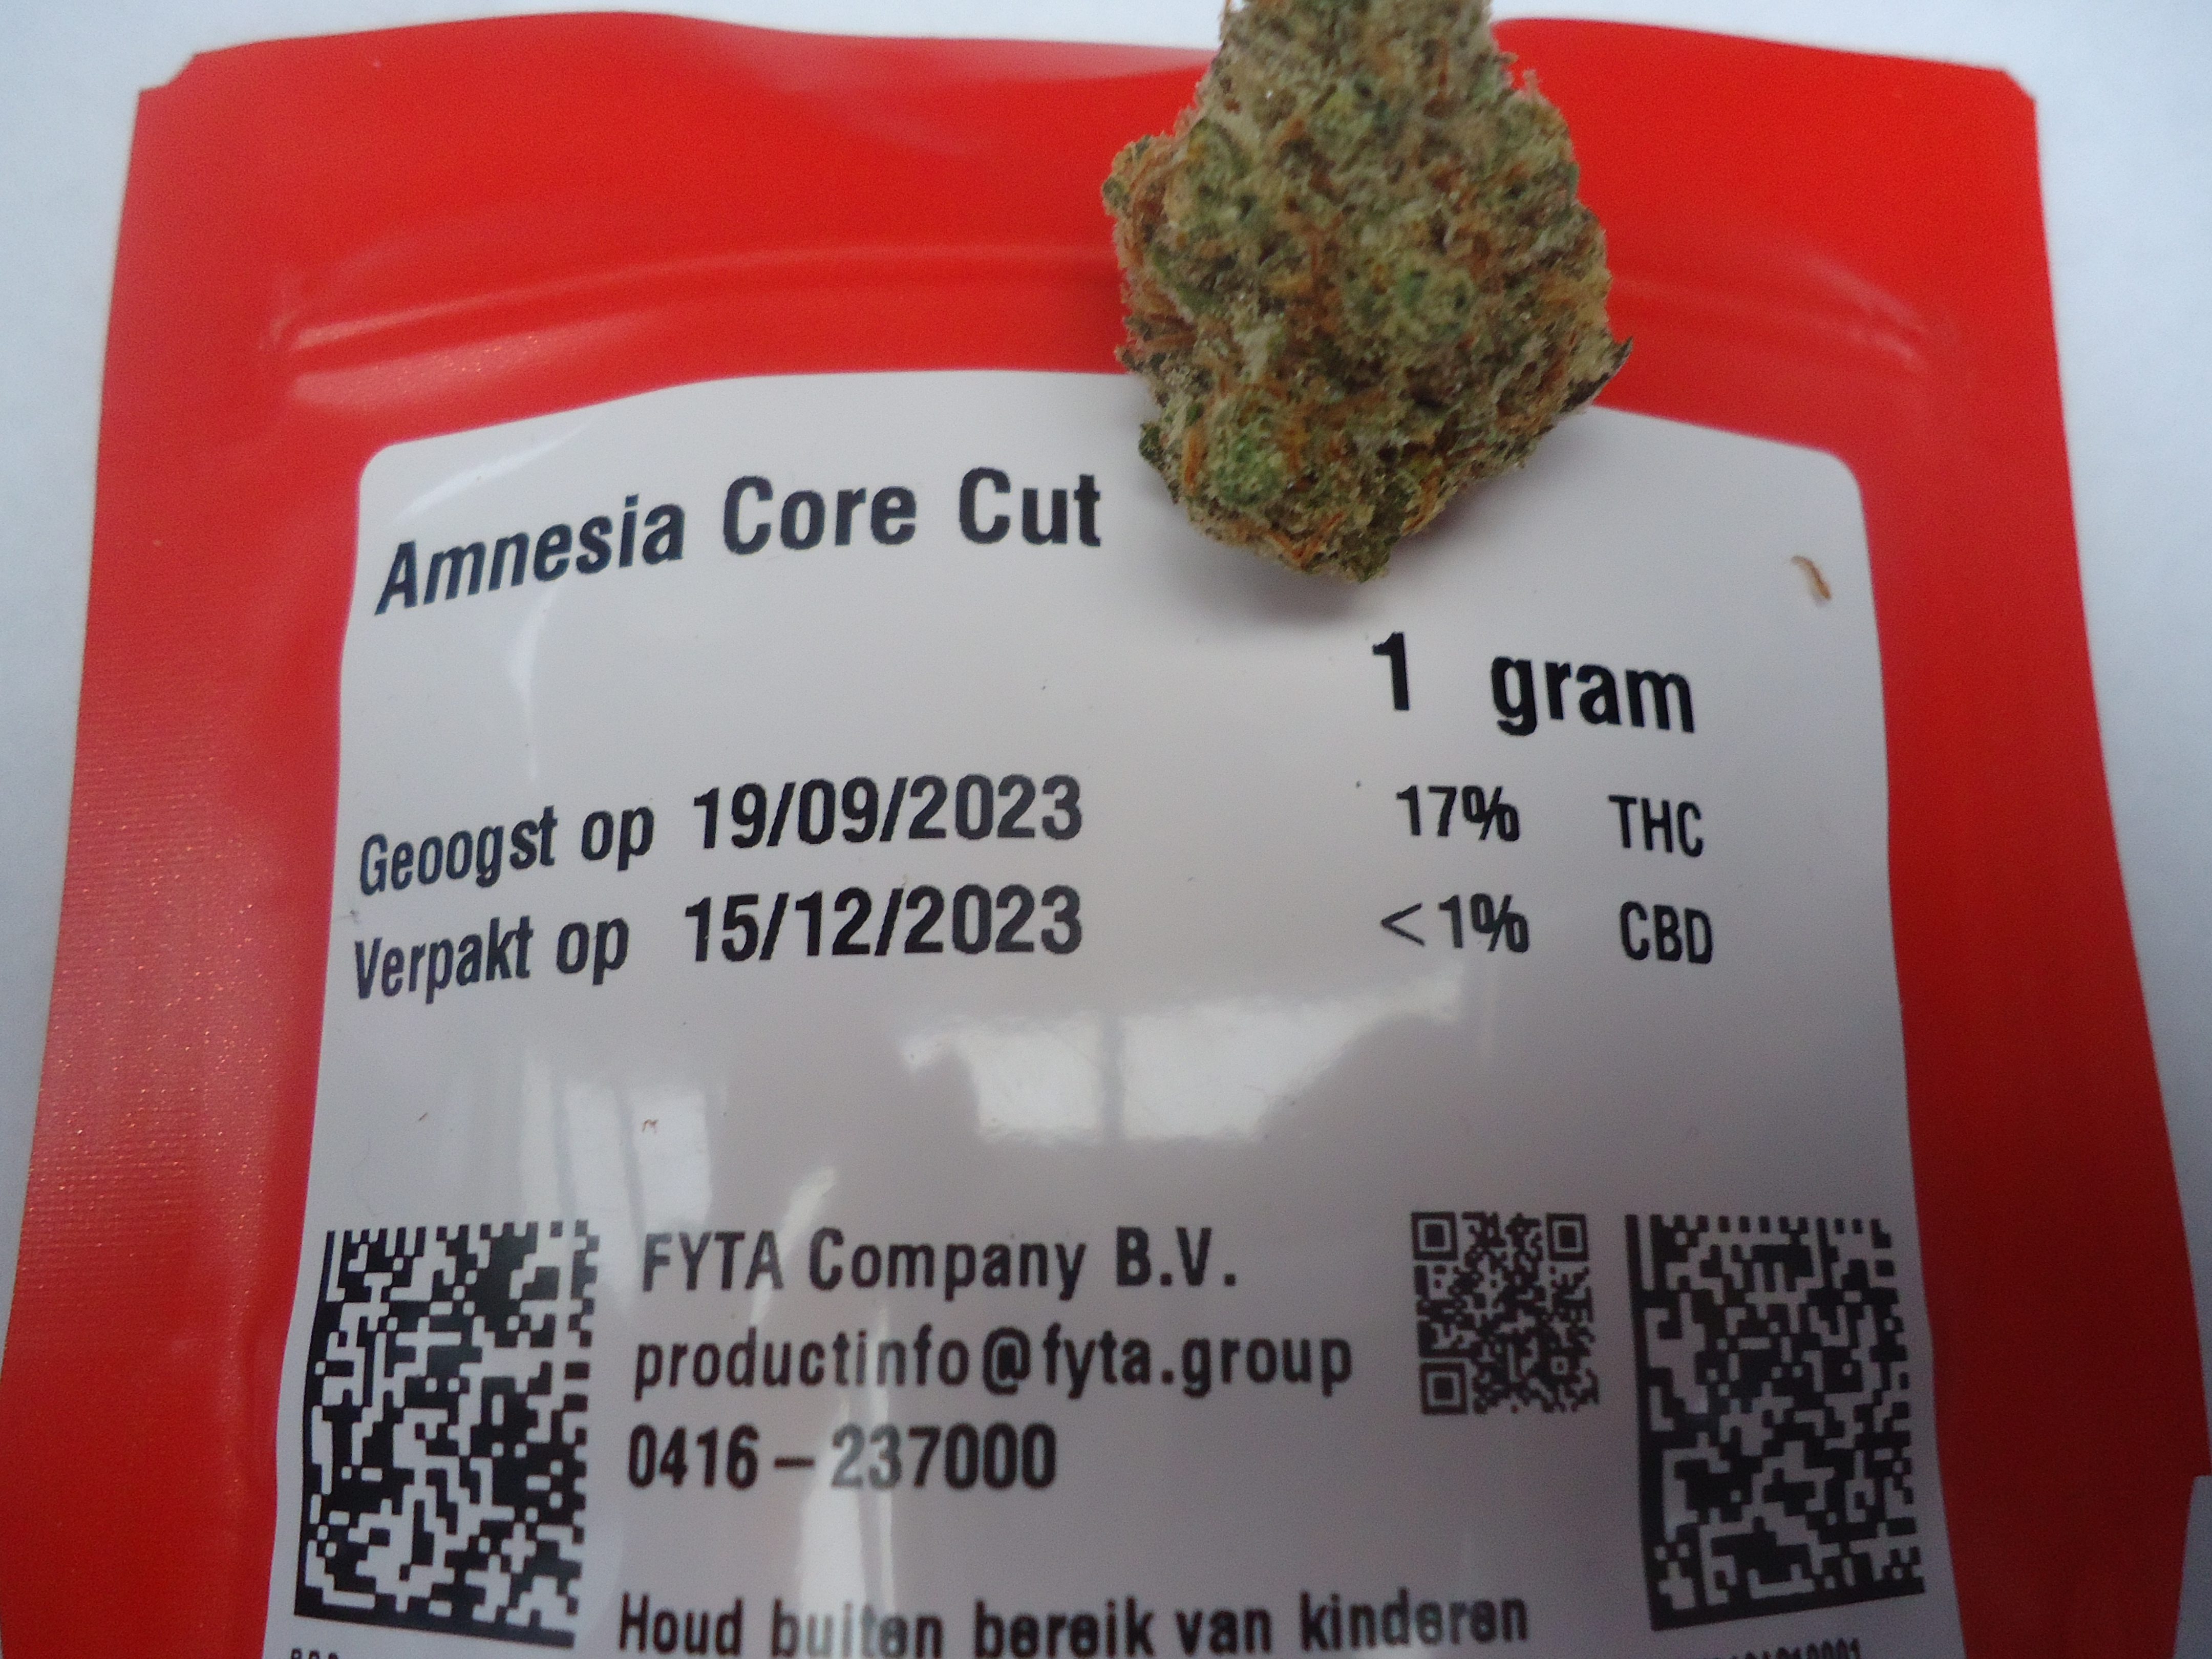 6 Legal Amnesia Core Cut From Fyta From Coffeeshops.December.2023.JPG